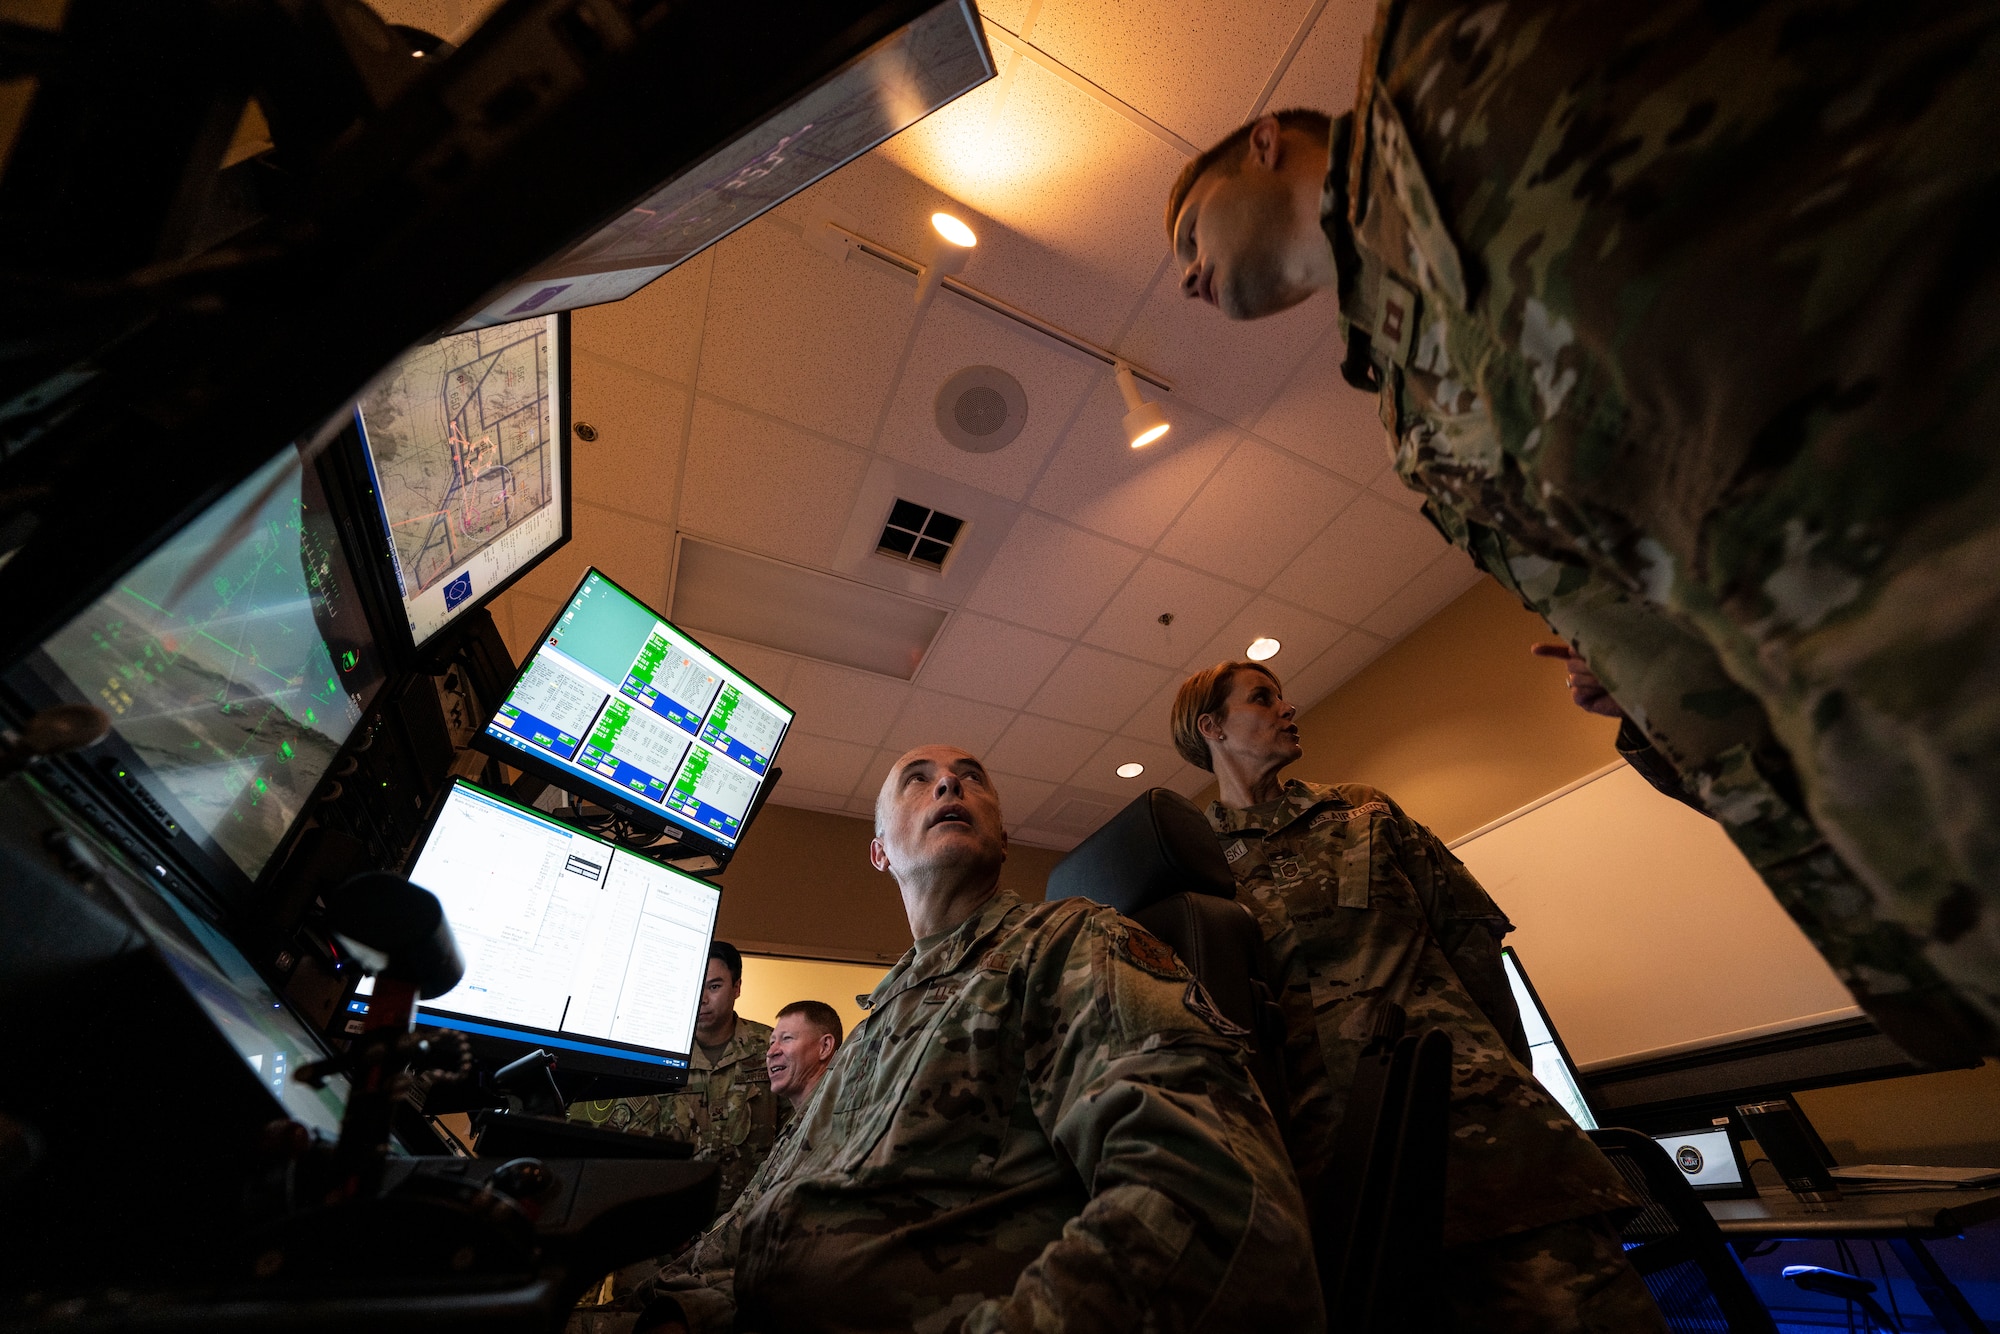 Lt. Gen. Robert Miller, Surgeon General of the Air Force and Space Force, looks at a flight instructor from the pilot's seat in an  MQ-9 Reaper simulator.